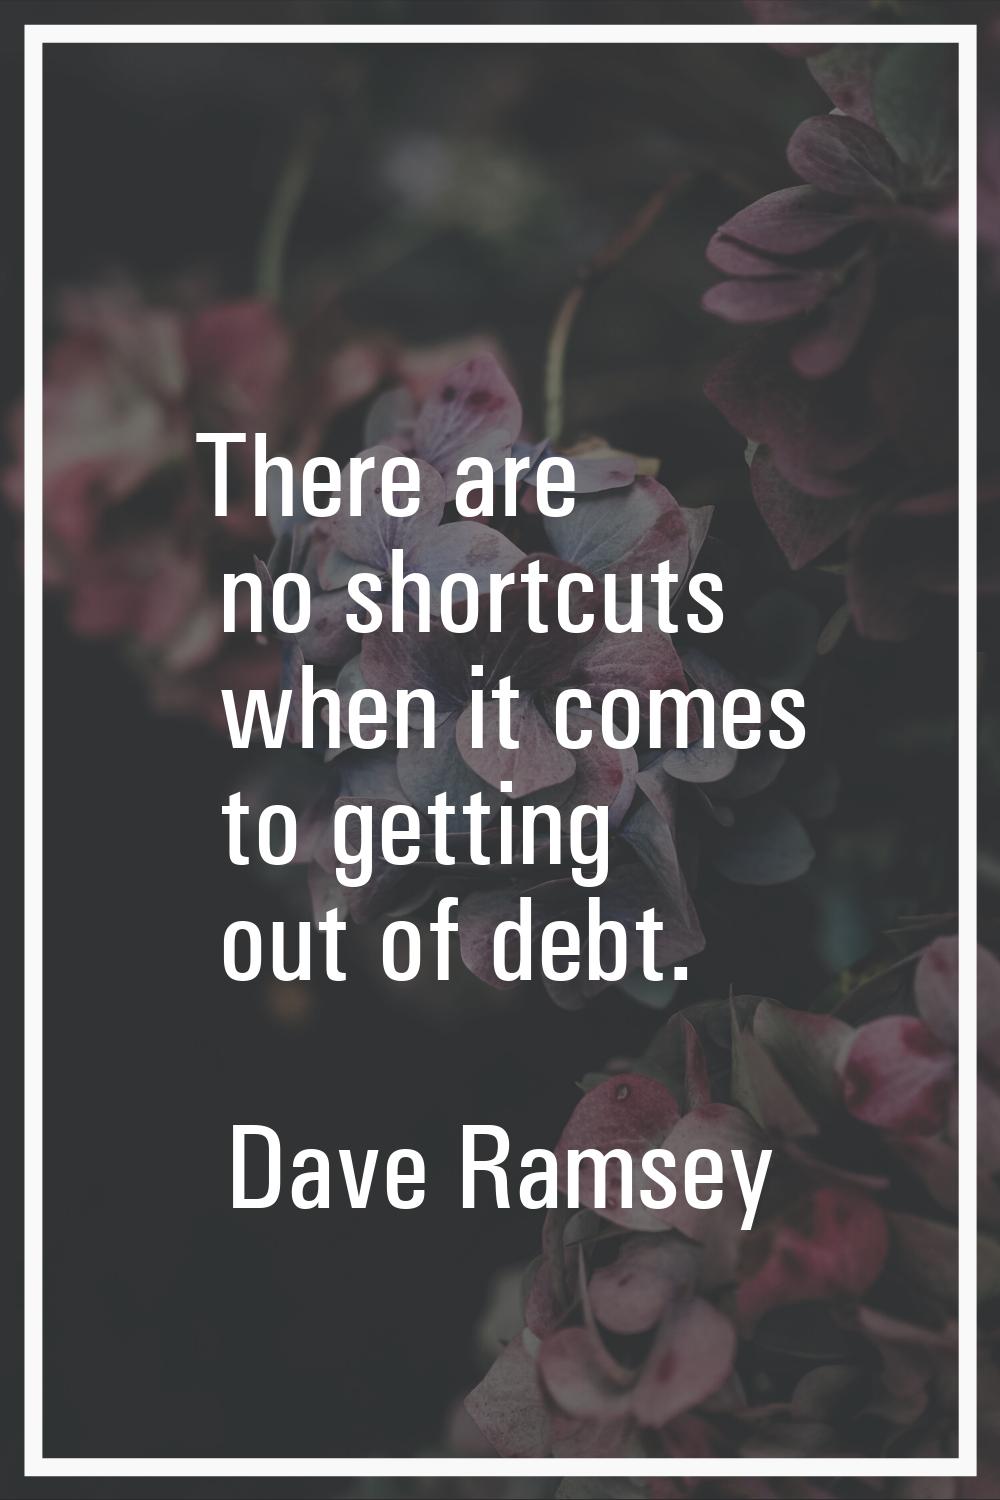 There are no shortcuts when it comes to getting out of debt.